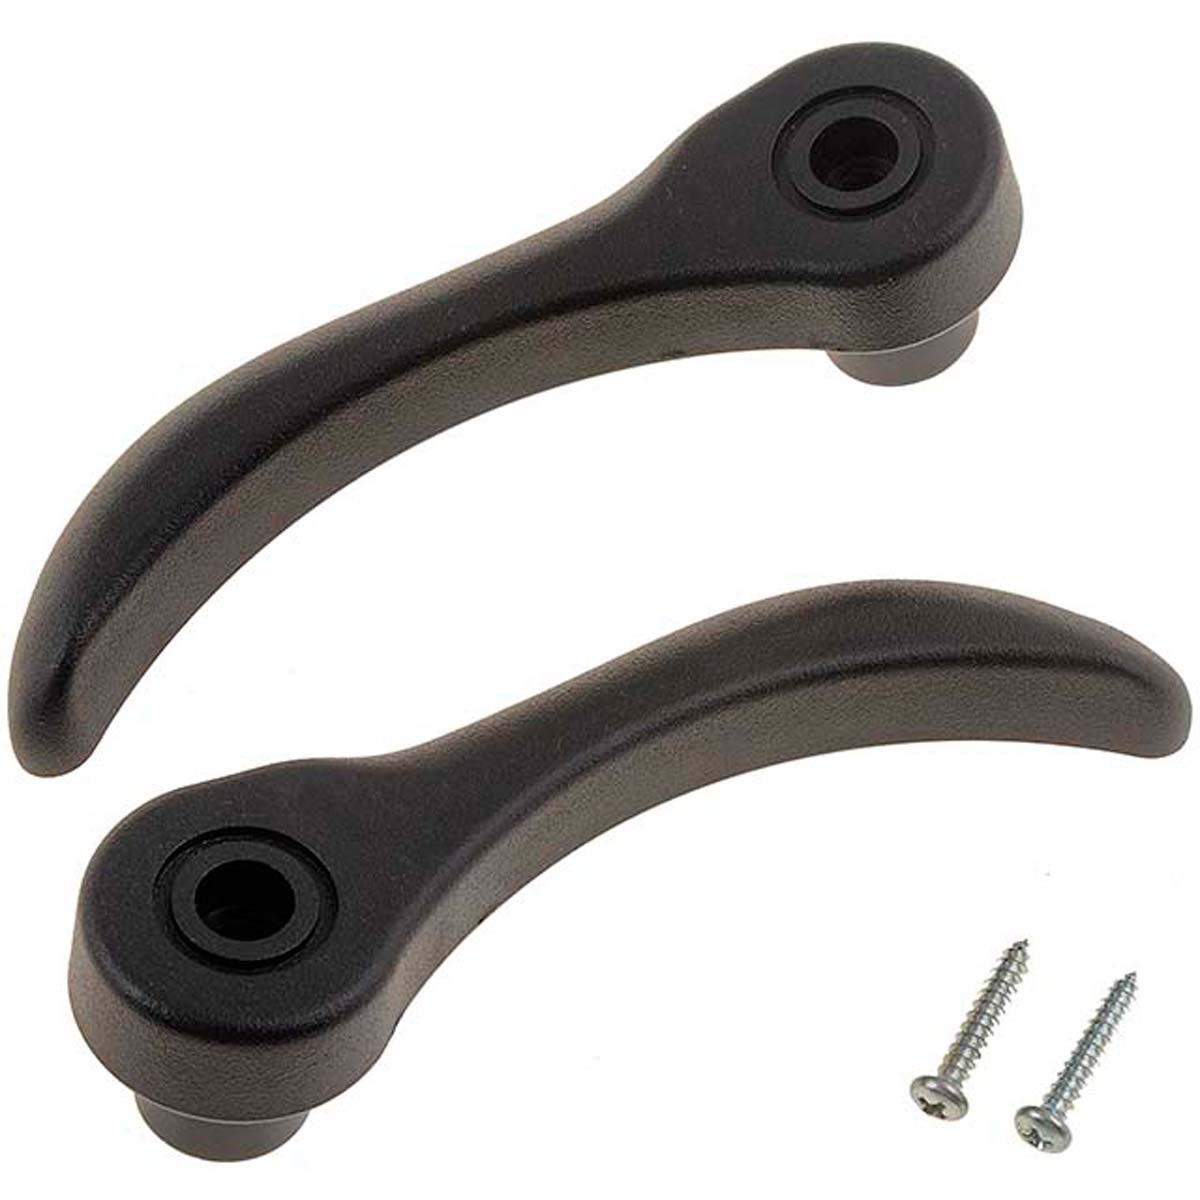 New Seat Release Handle Lever Fits Chevy S10 Pickup 98-03 # 12473015 12473018